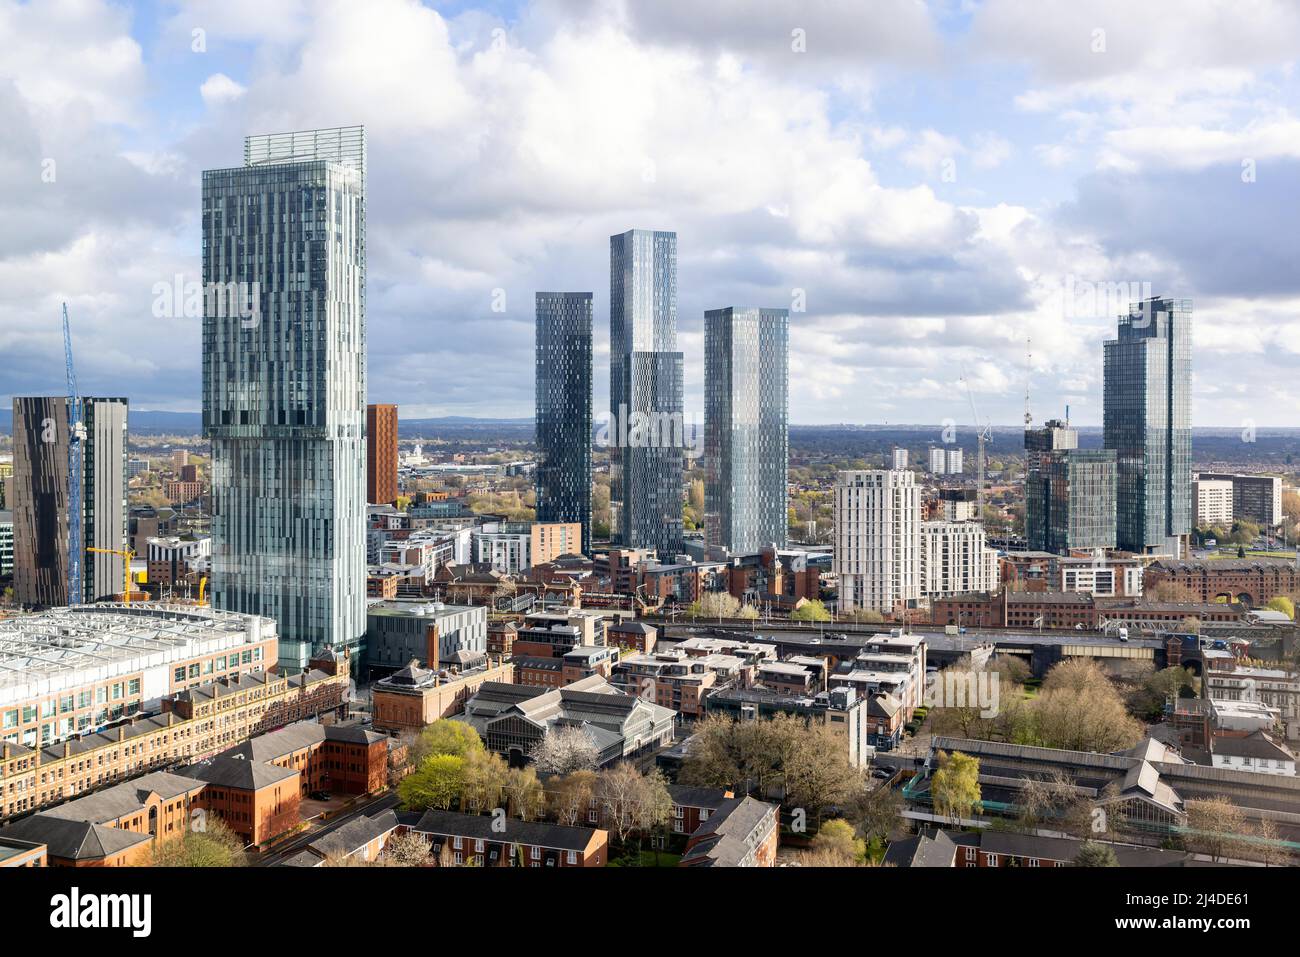 Manchester views. Beetham tower, Deansgate (left) and Deansgate Square (centre). Stock Photo